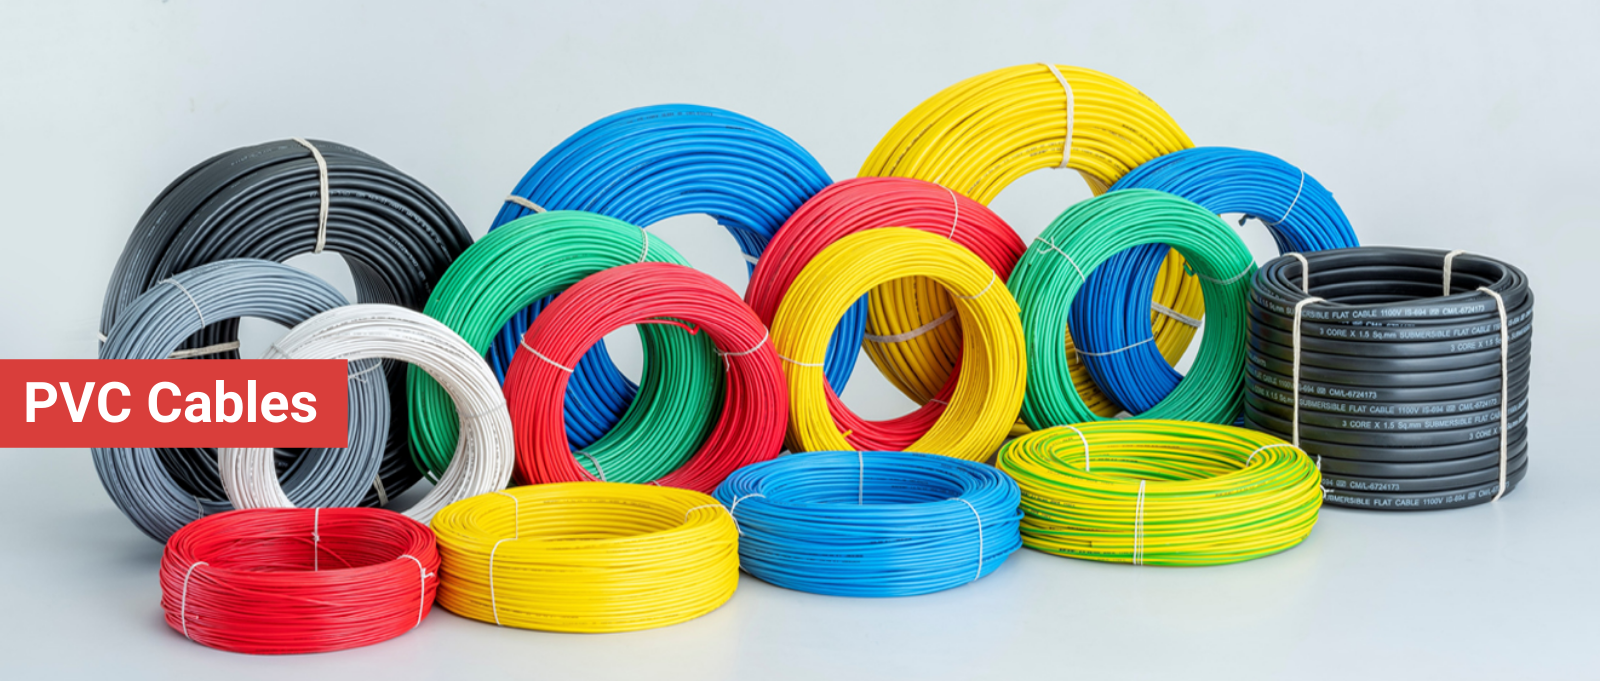 Manufacturers of PVC Cables in Mumbai